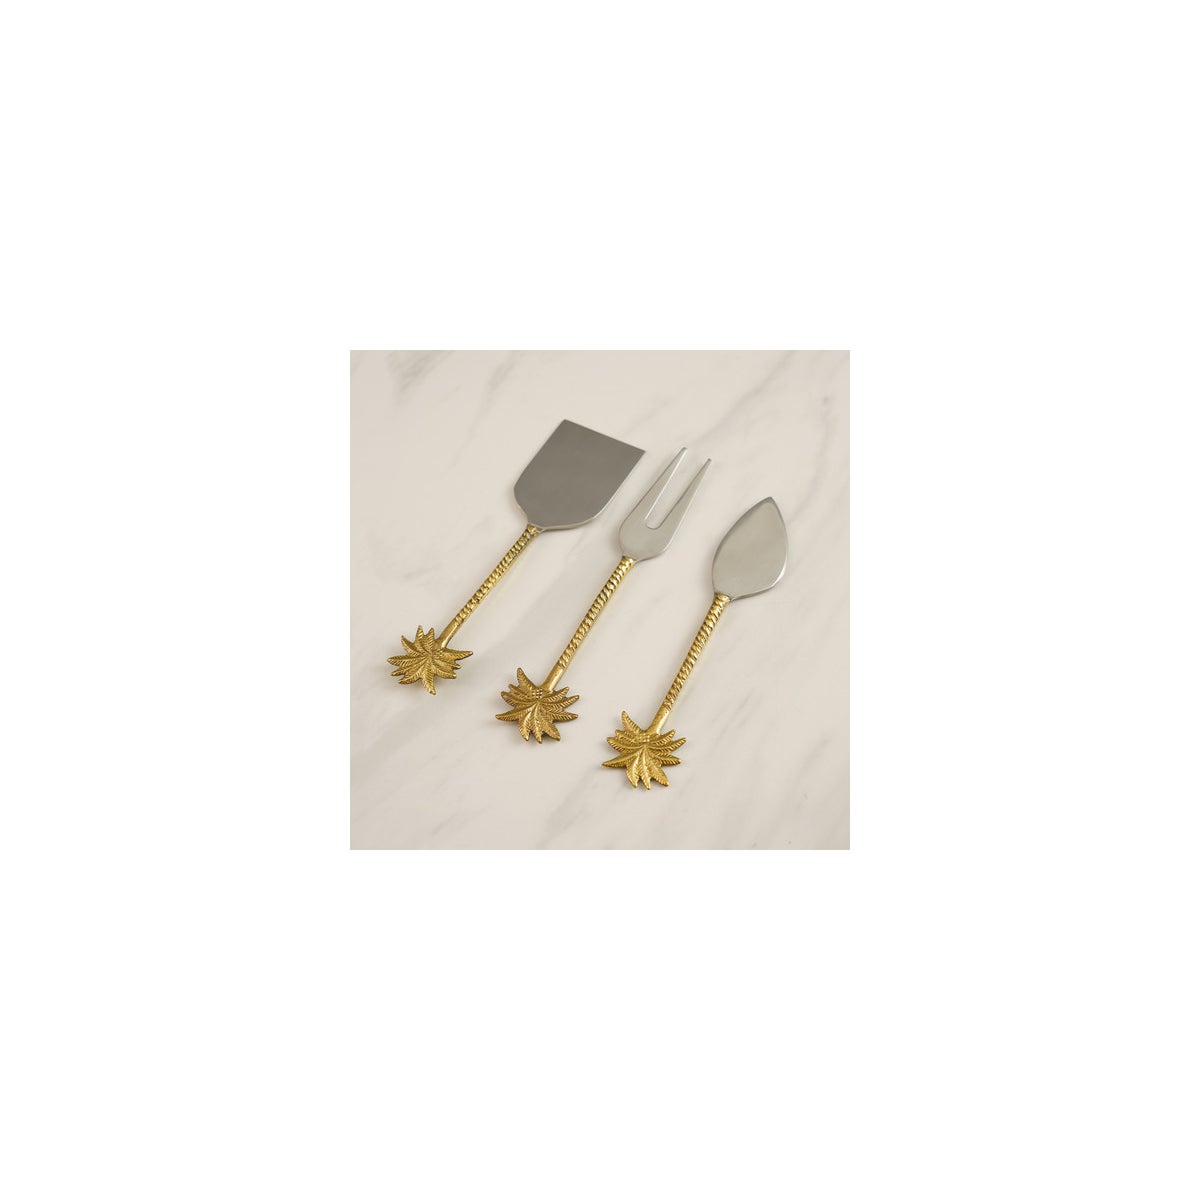 Gold Palm Tree Shaped Handle Cheese Set of 3